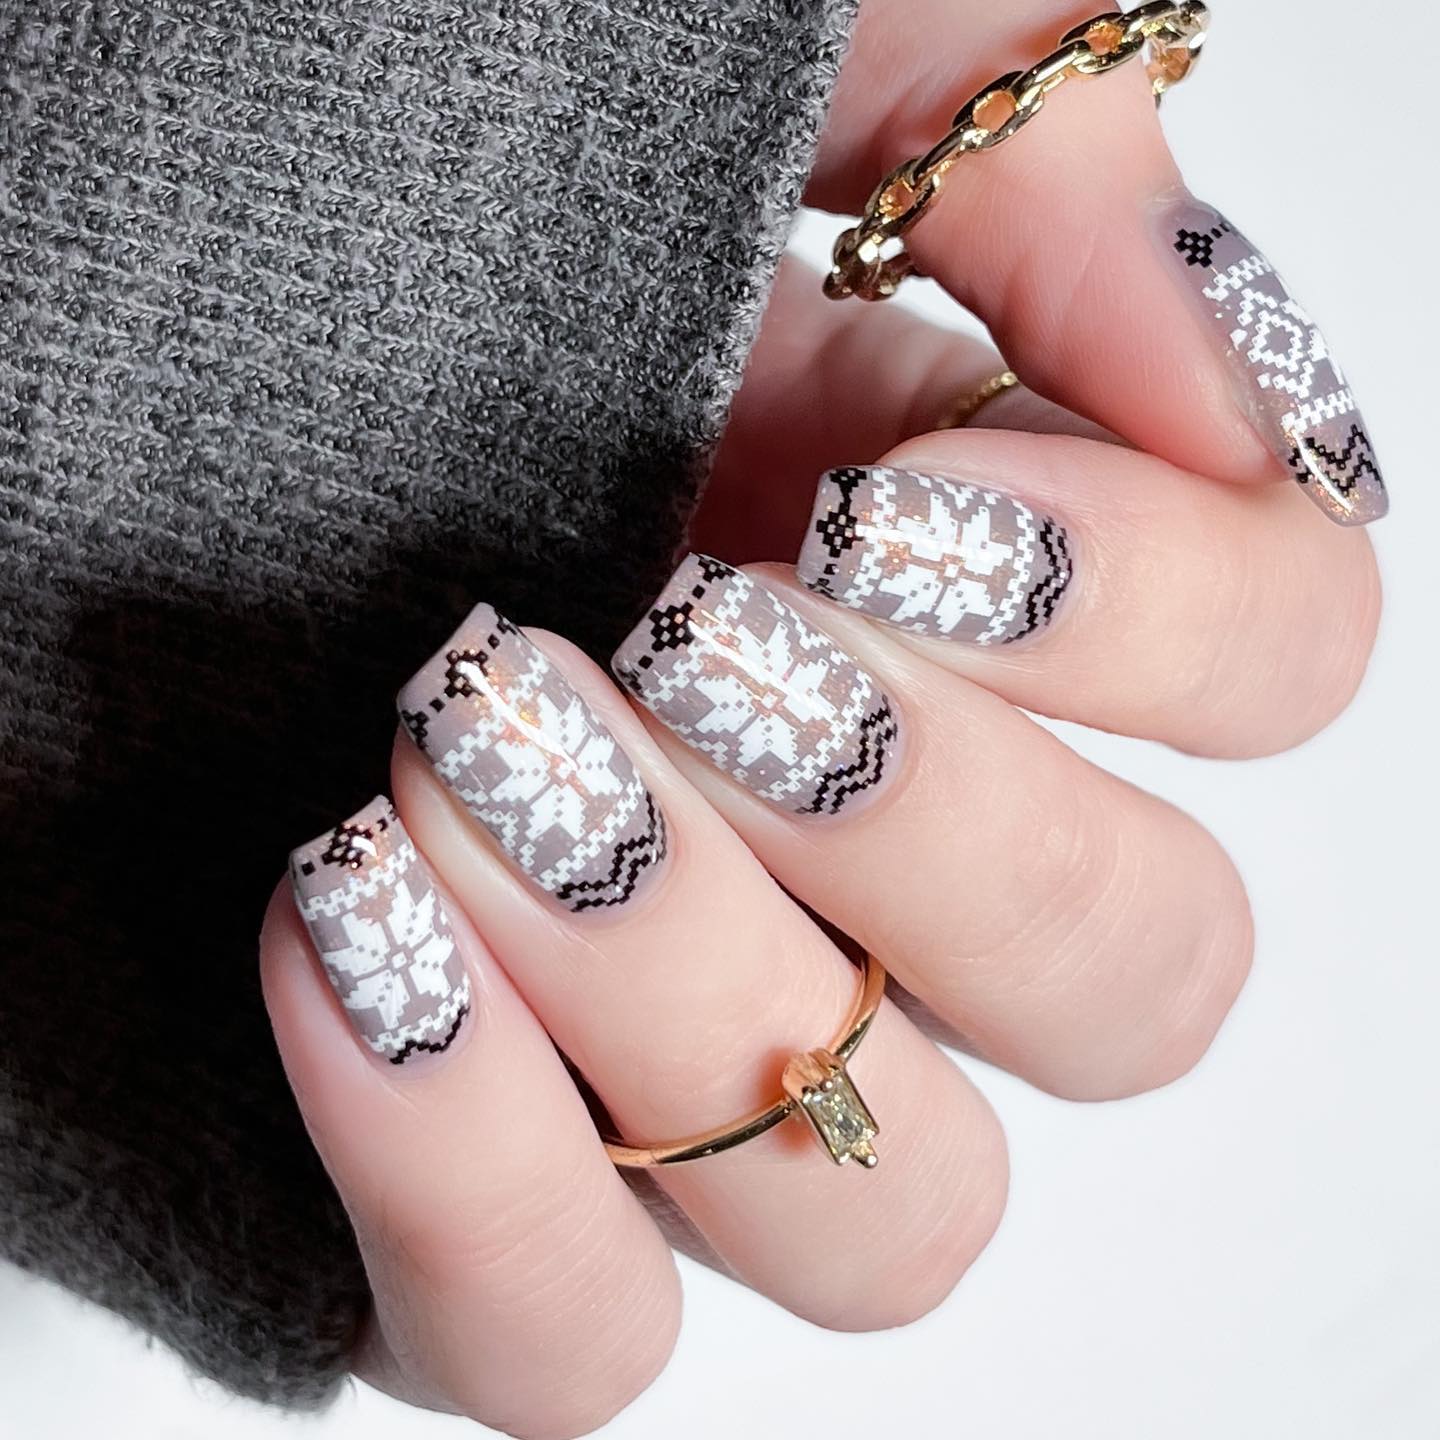 Iconic snow sweaters are one of the best things in winter. If you love to wear them, now it's time to wear them on your nails.